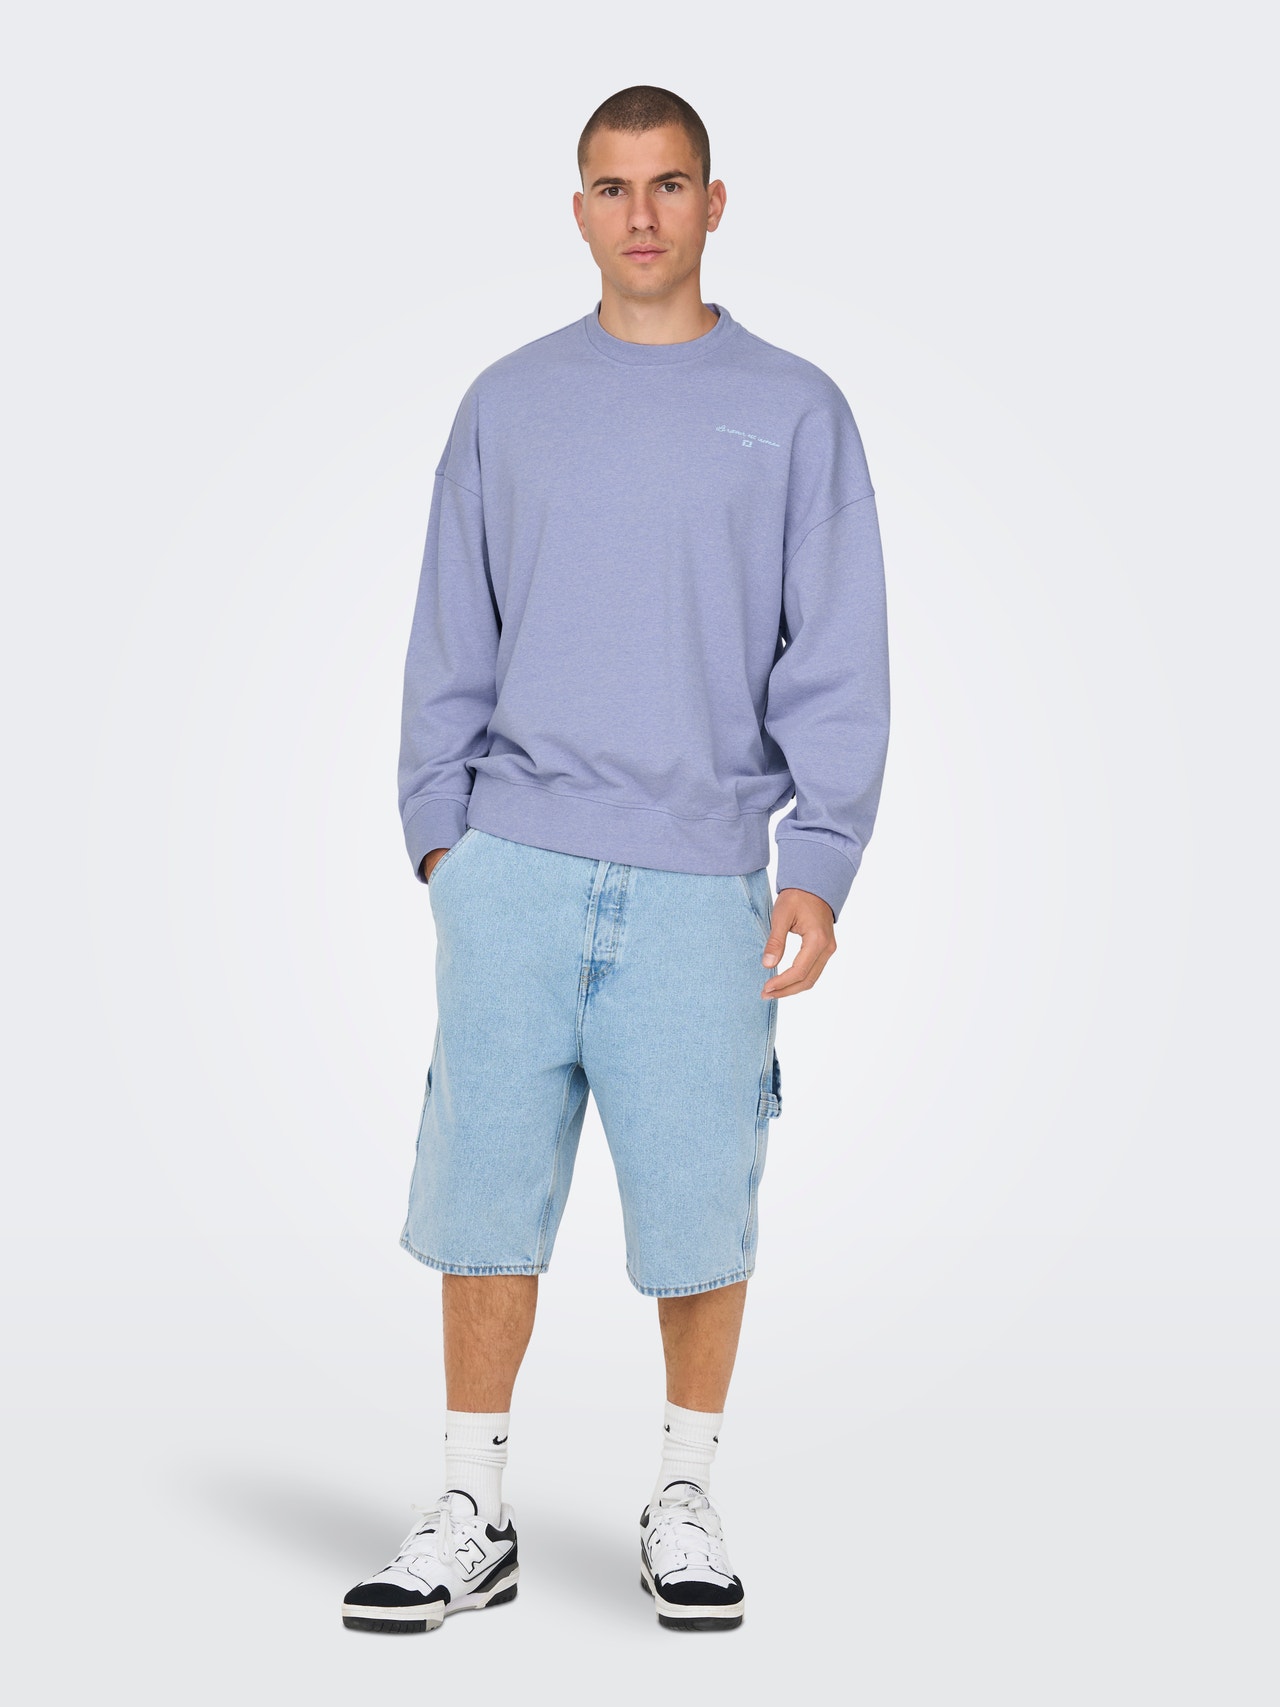 ONLY & SONS Relaxed Fit Crew neck Dropped shoulders Sweatshirt -Jacaranda - 22025298